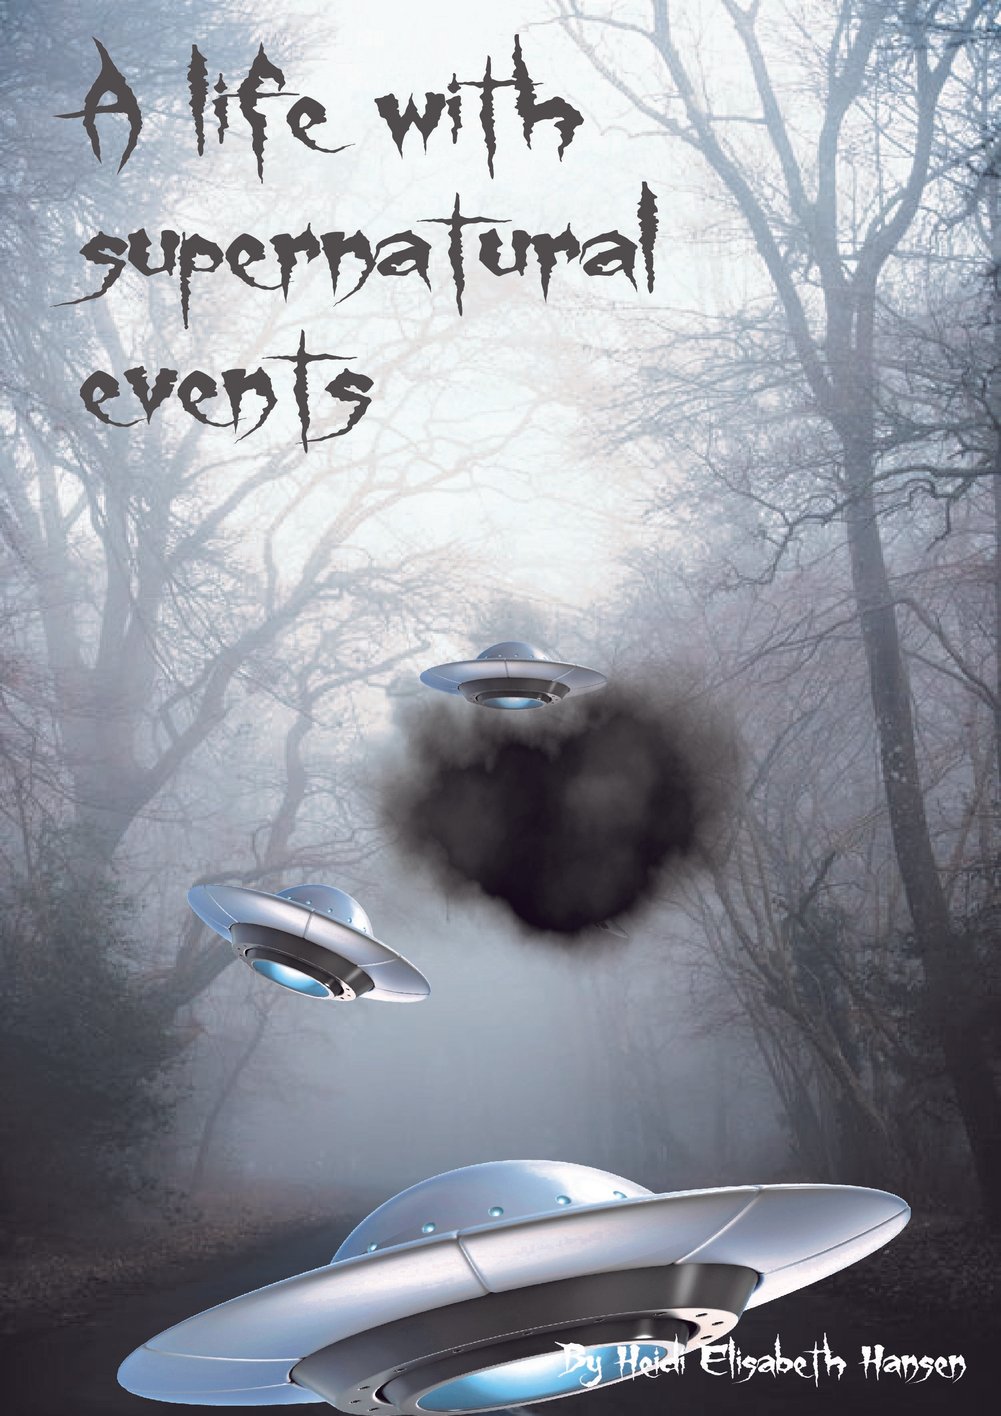 A Life With Supernatural Events godinspire.one